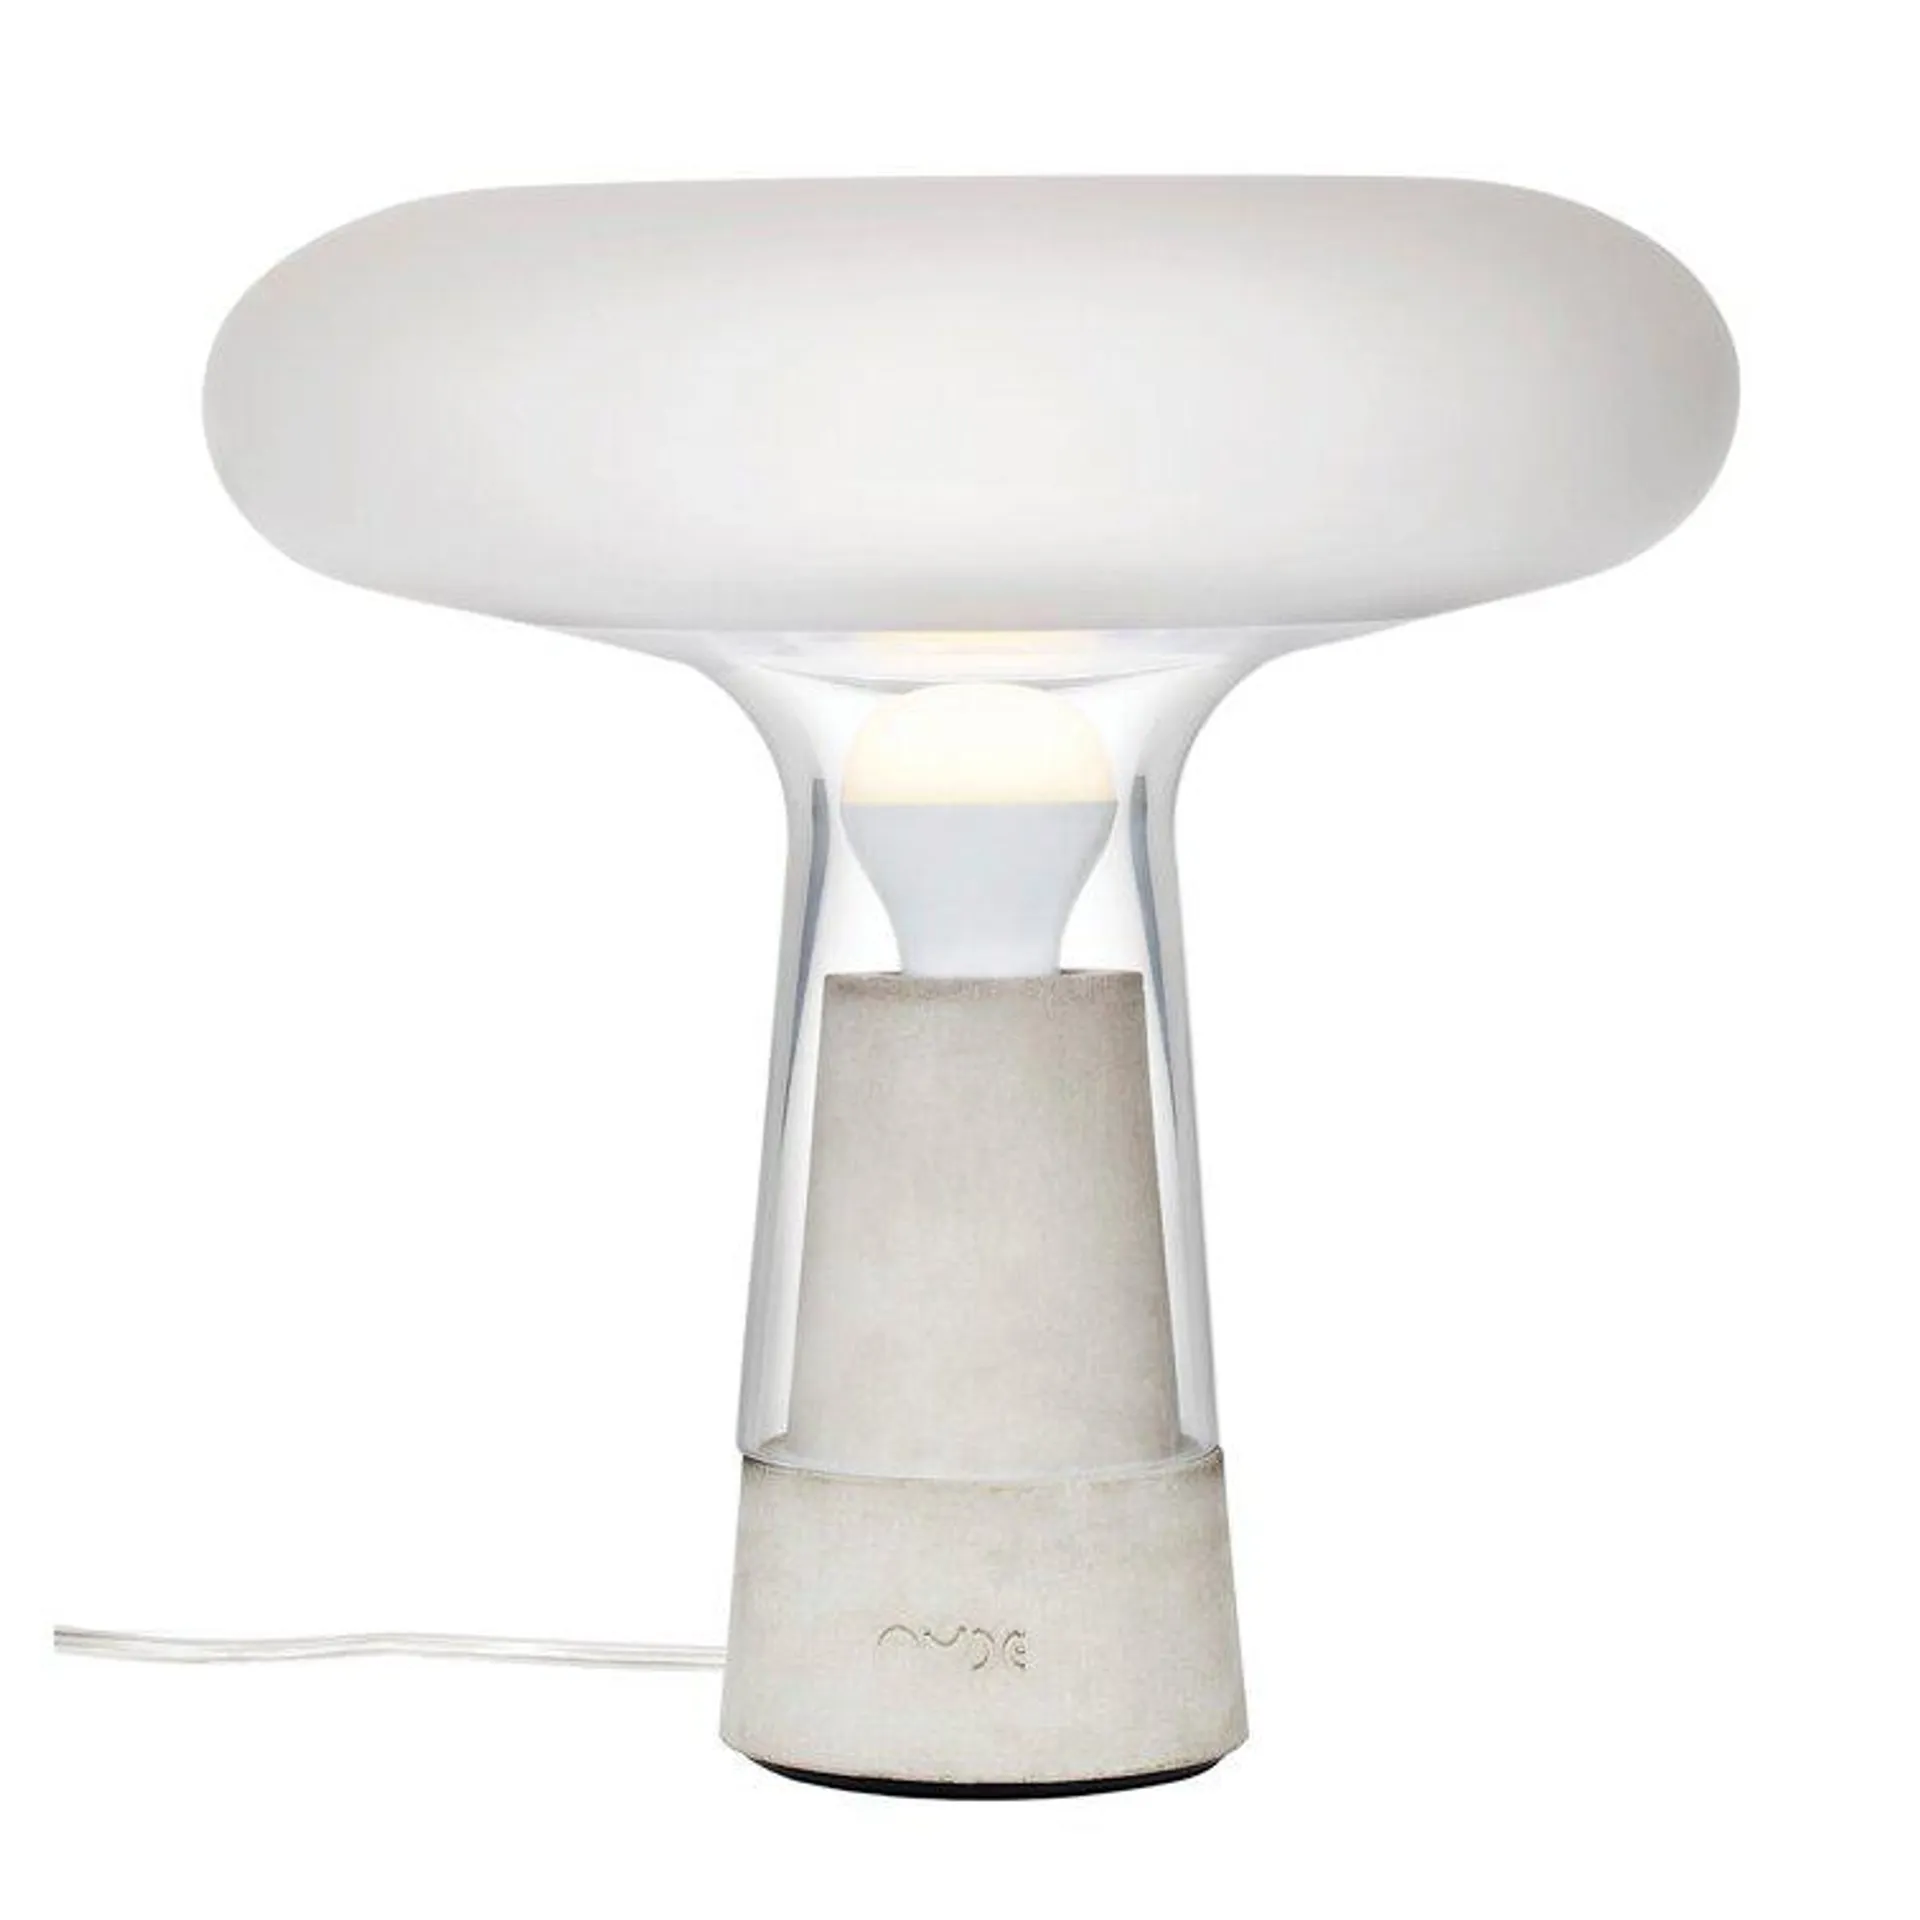 Orion 12.6" Table Lamp